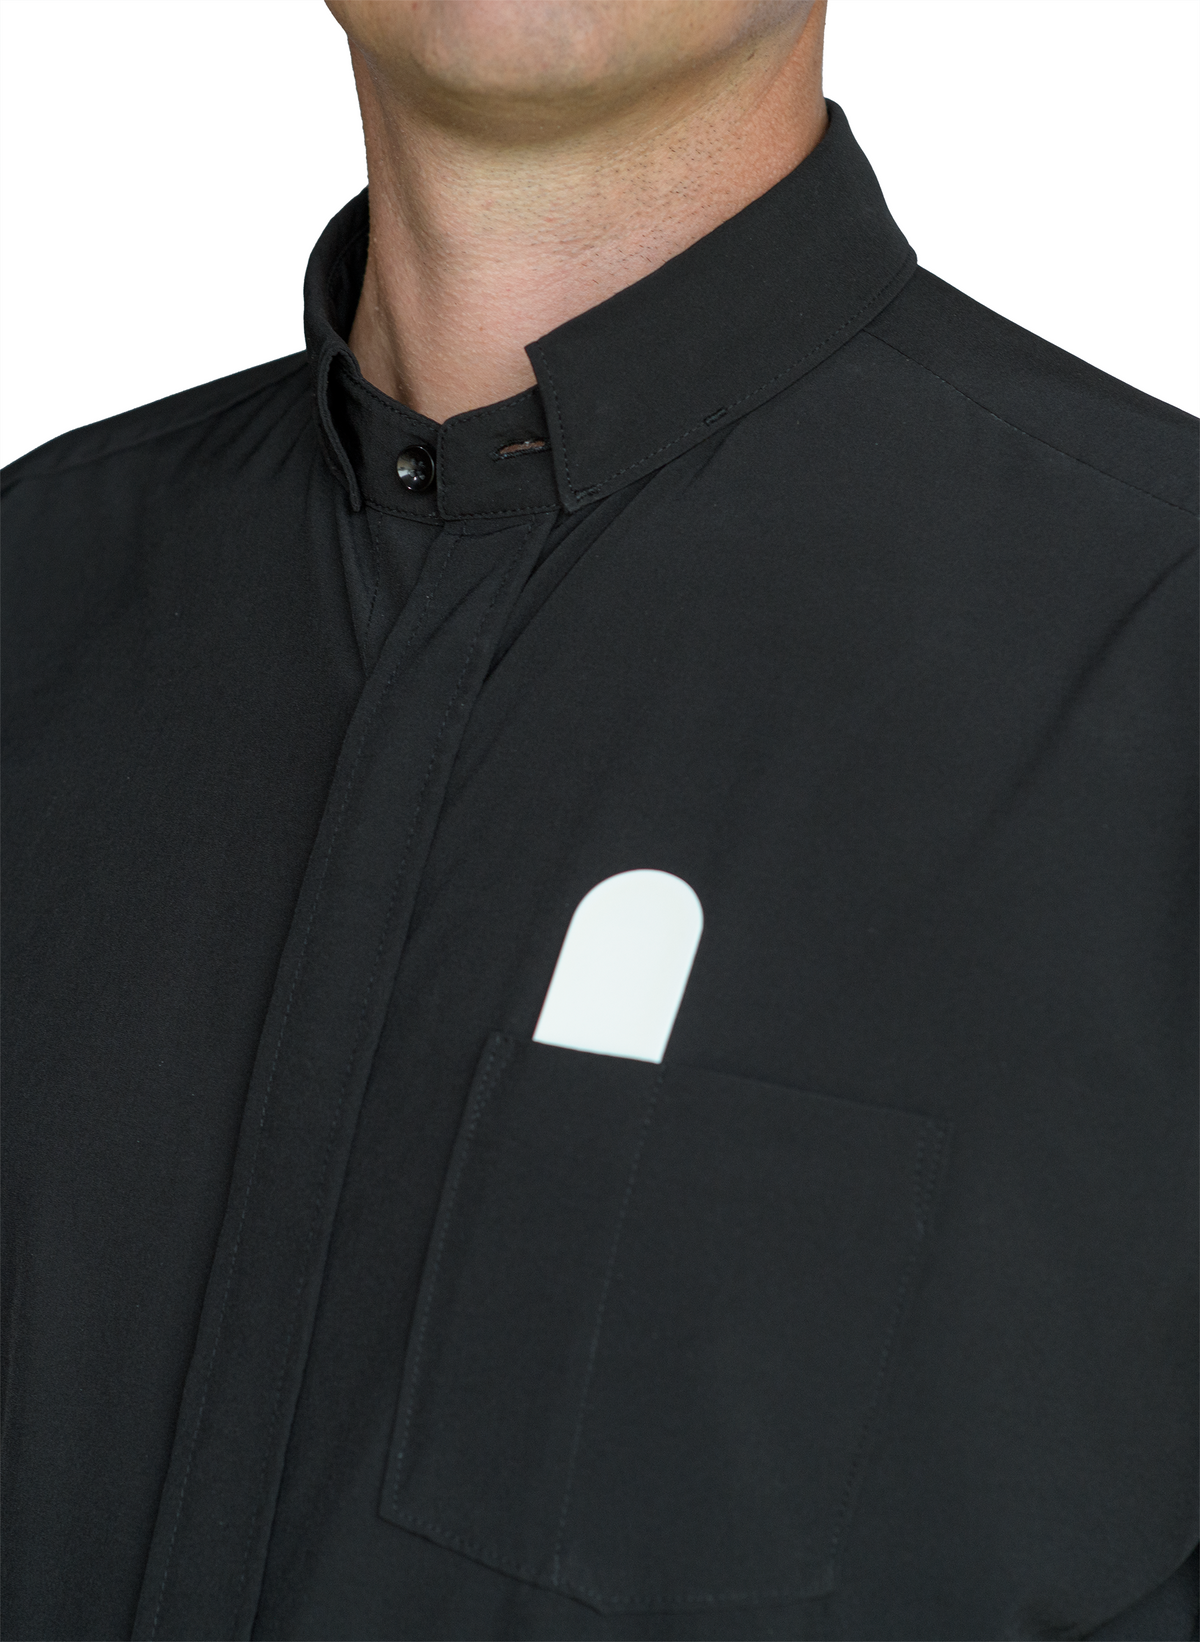 The Performance Clerical - Long Sleeve